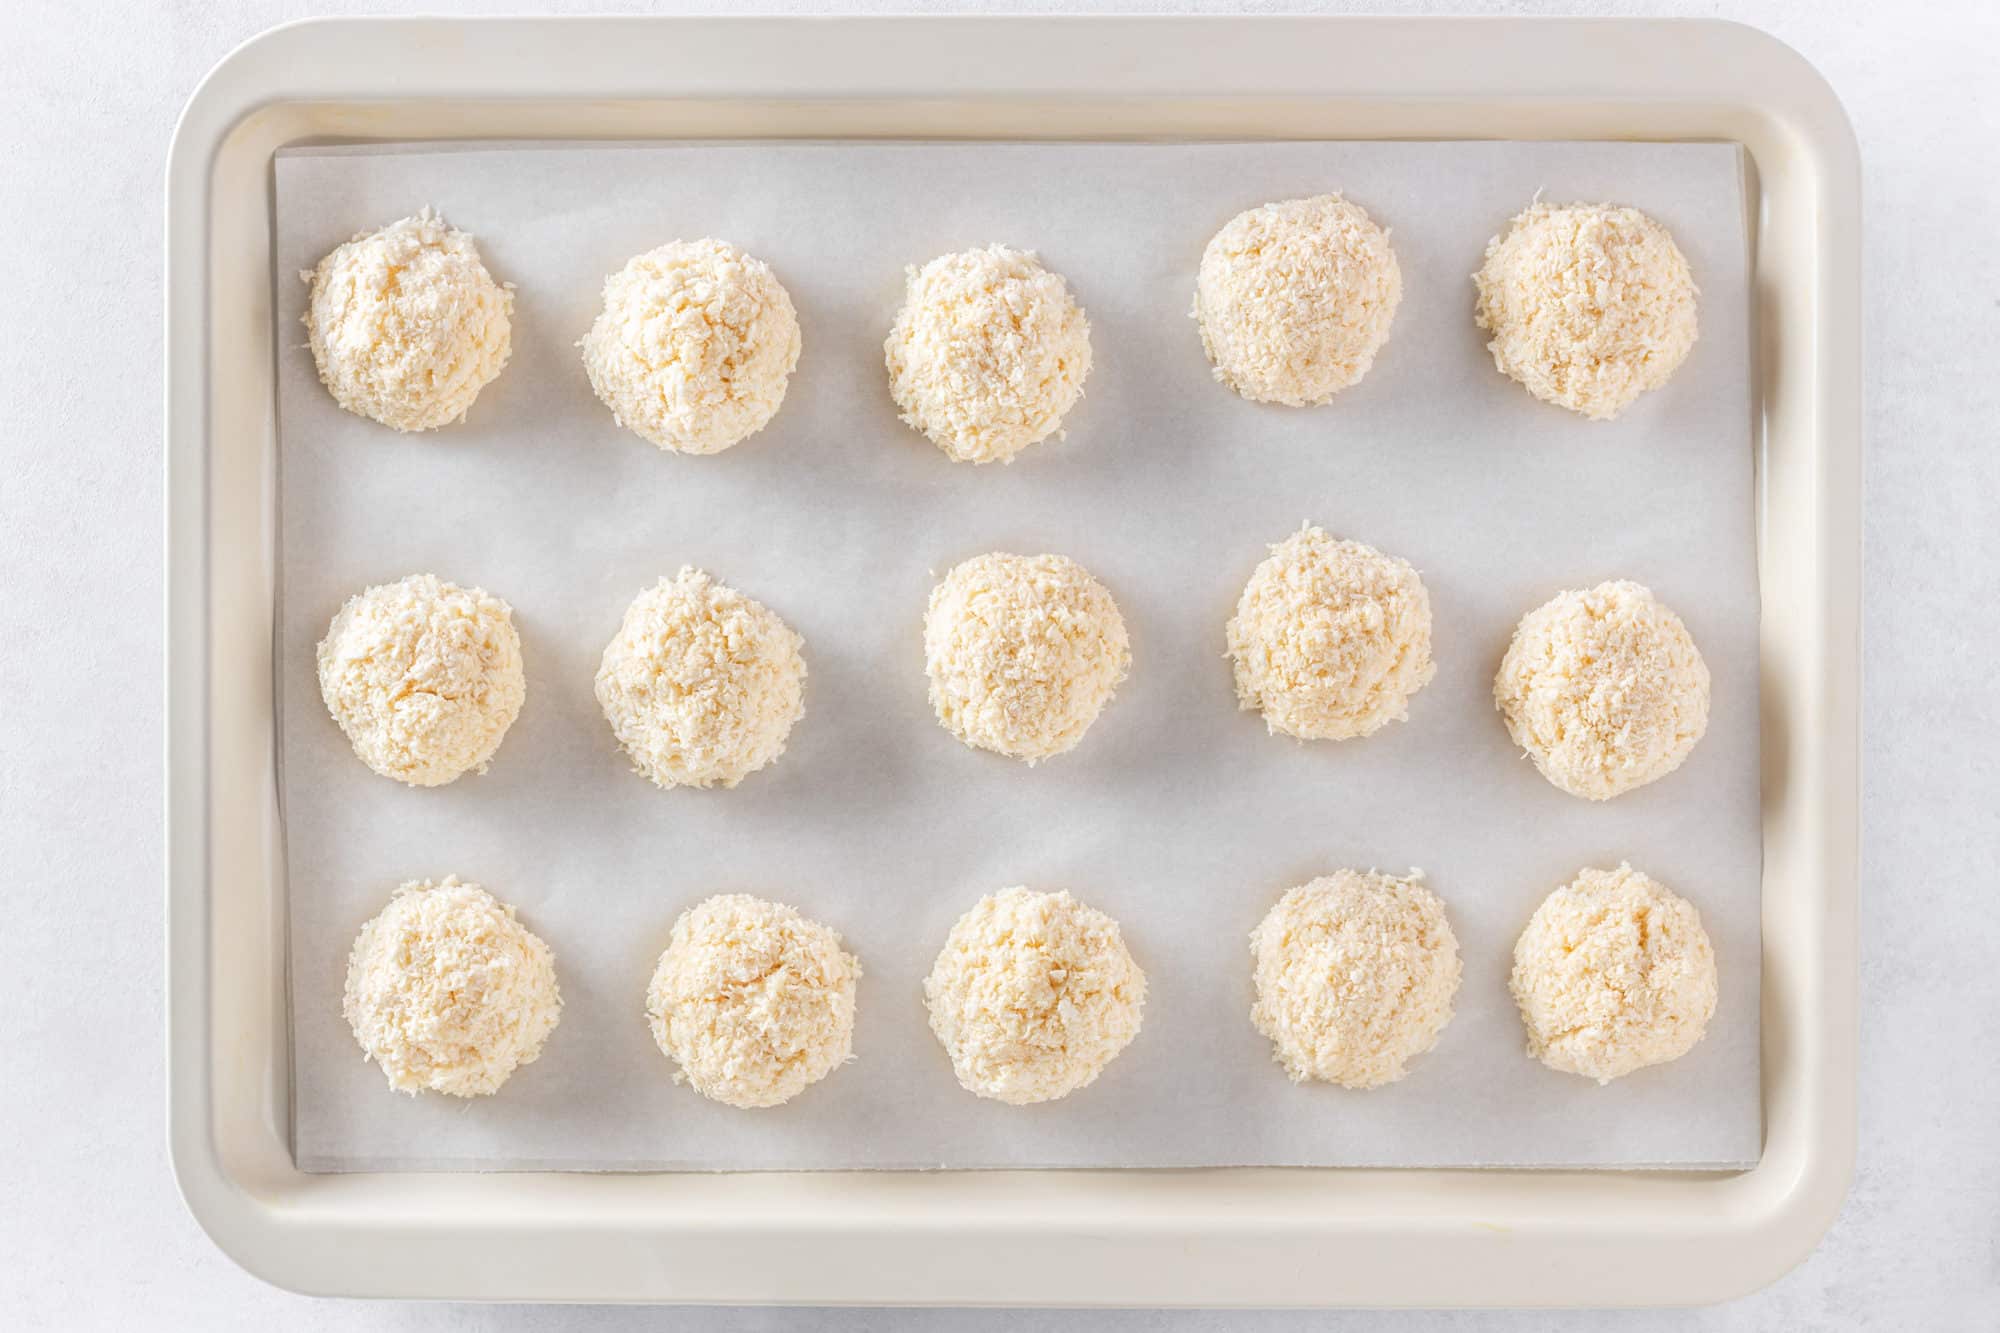 Coconut macaroons ready to bake.